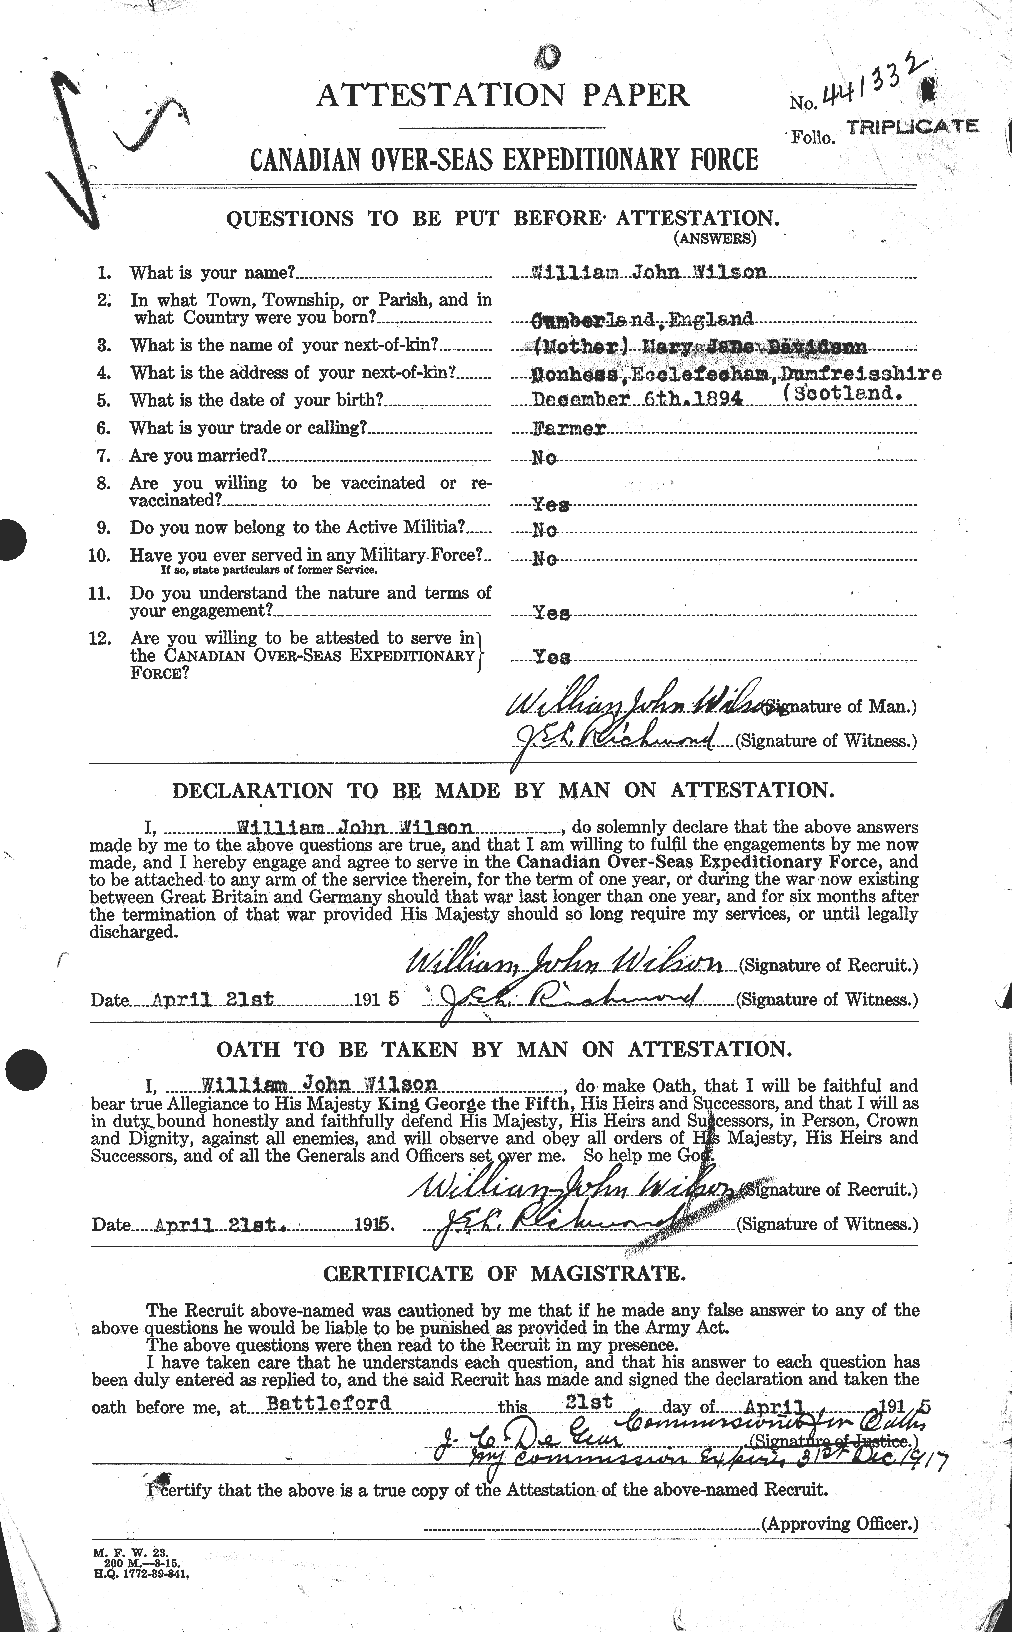 Personnel Records of the First World War - CEF 682063a